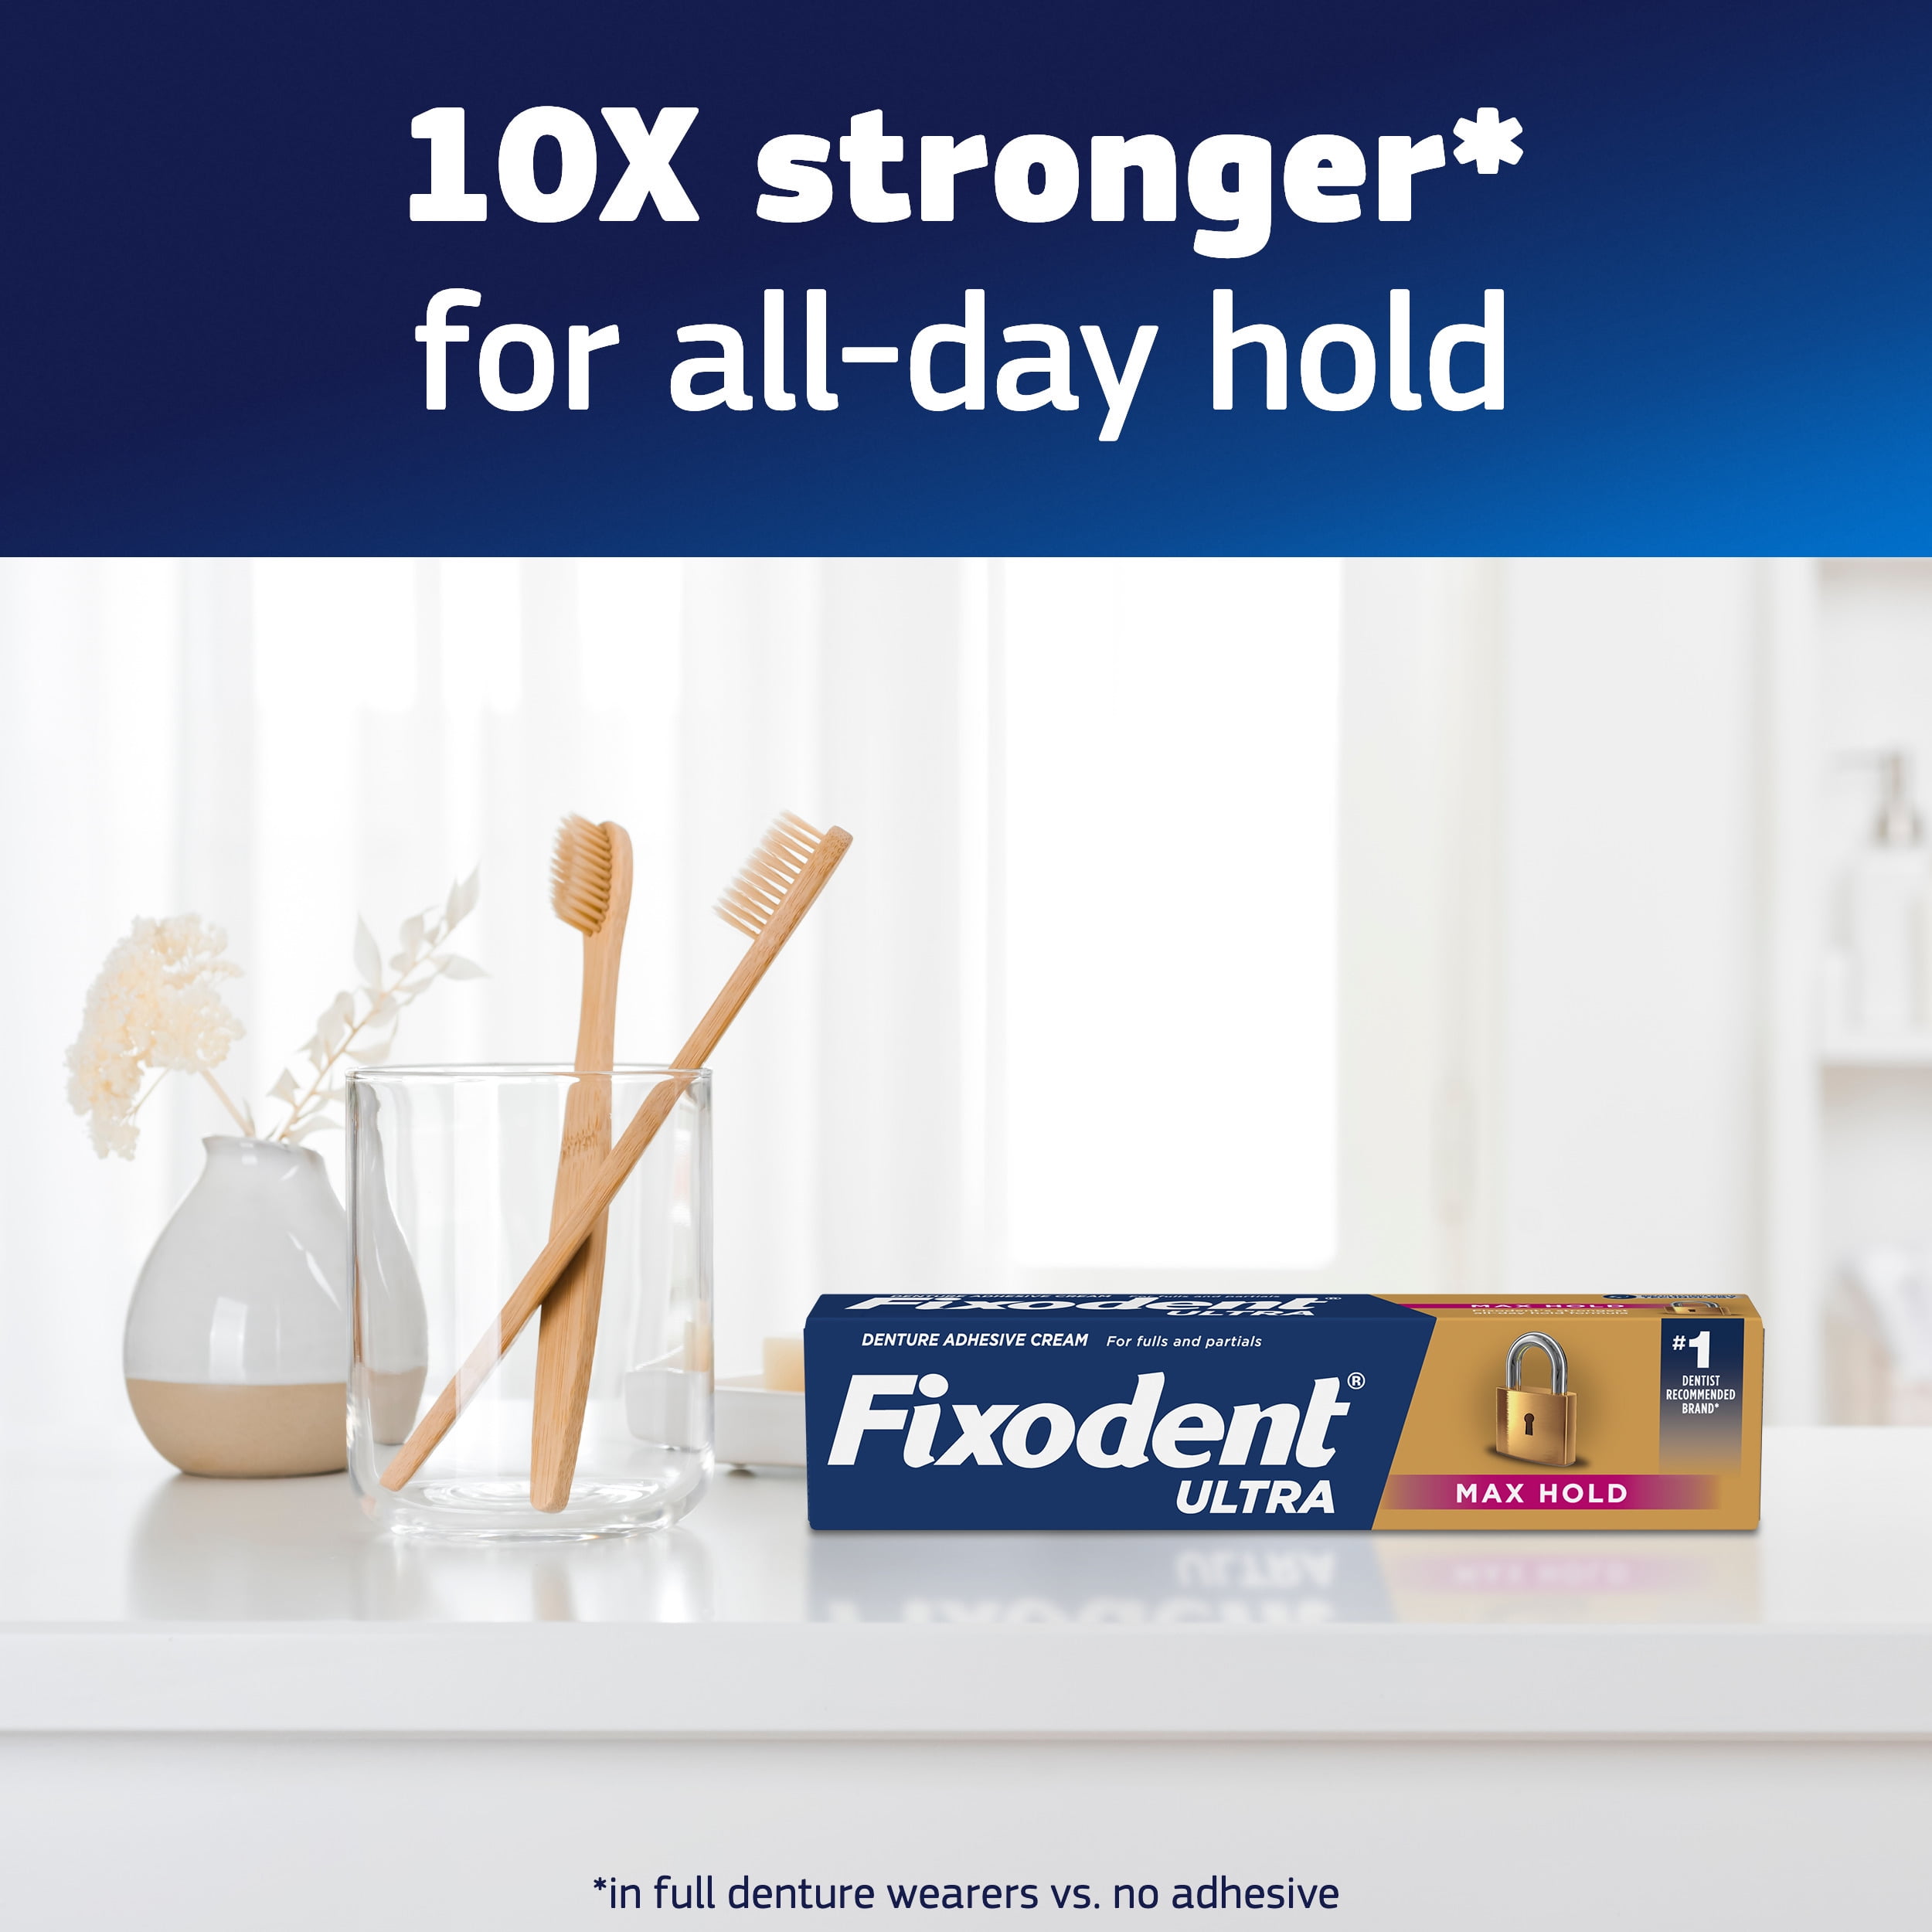 Fixodent ultra max hold dental adhesive pack, 3 ea